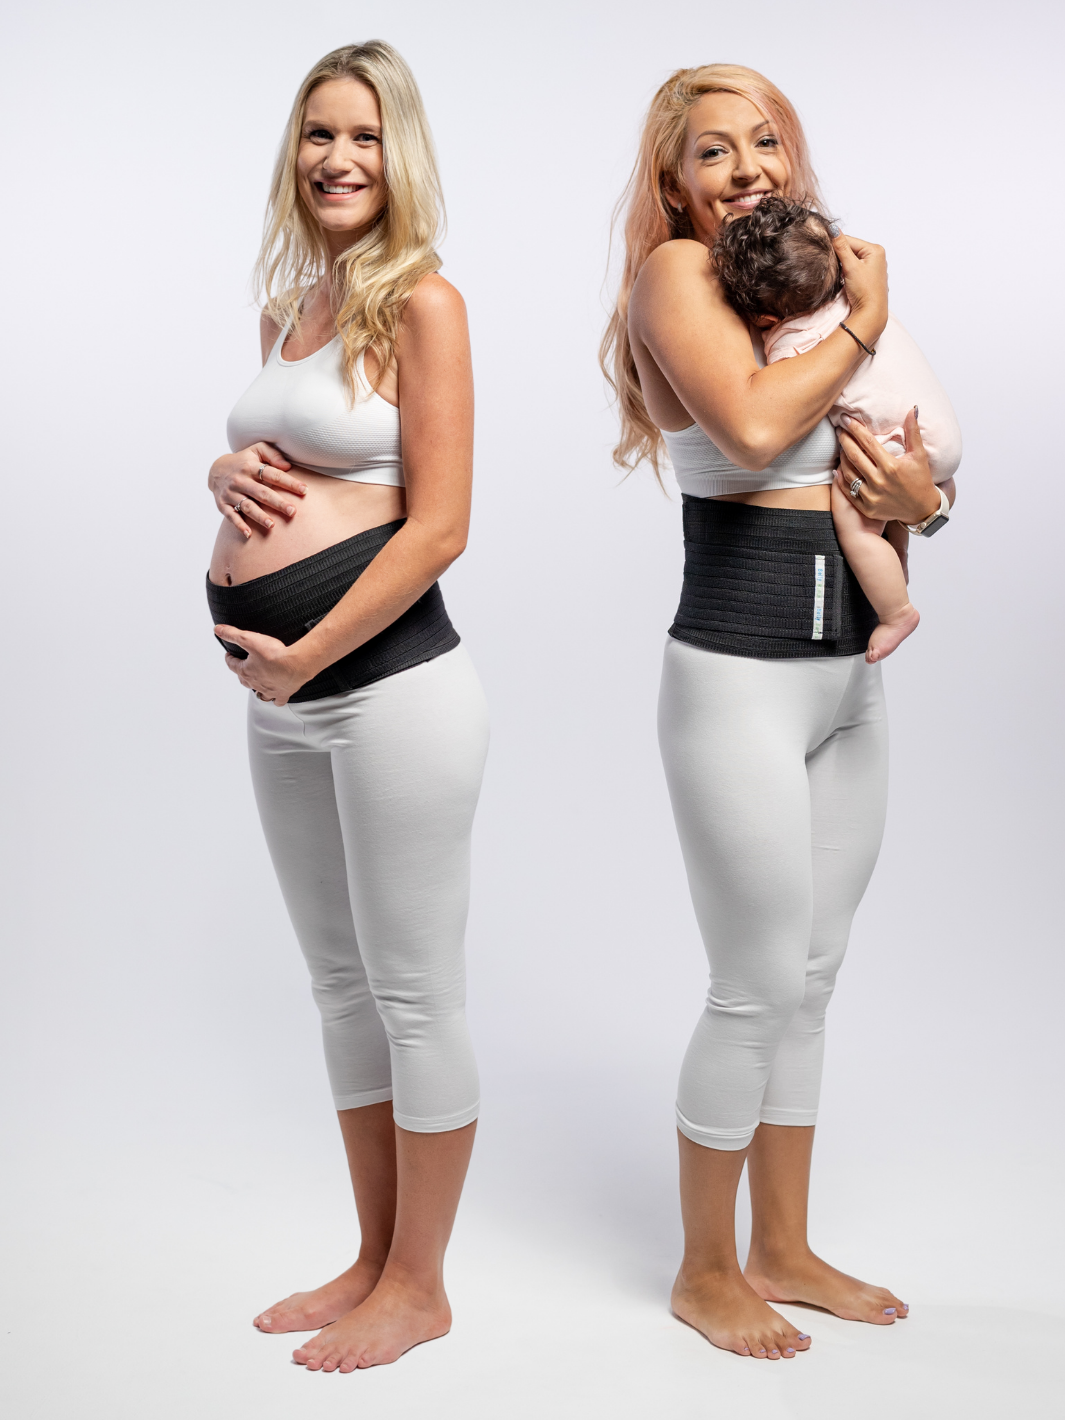 How to choose the best postpartum belly band in Australia? – Belly Bands